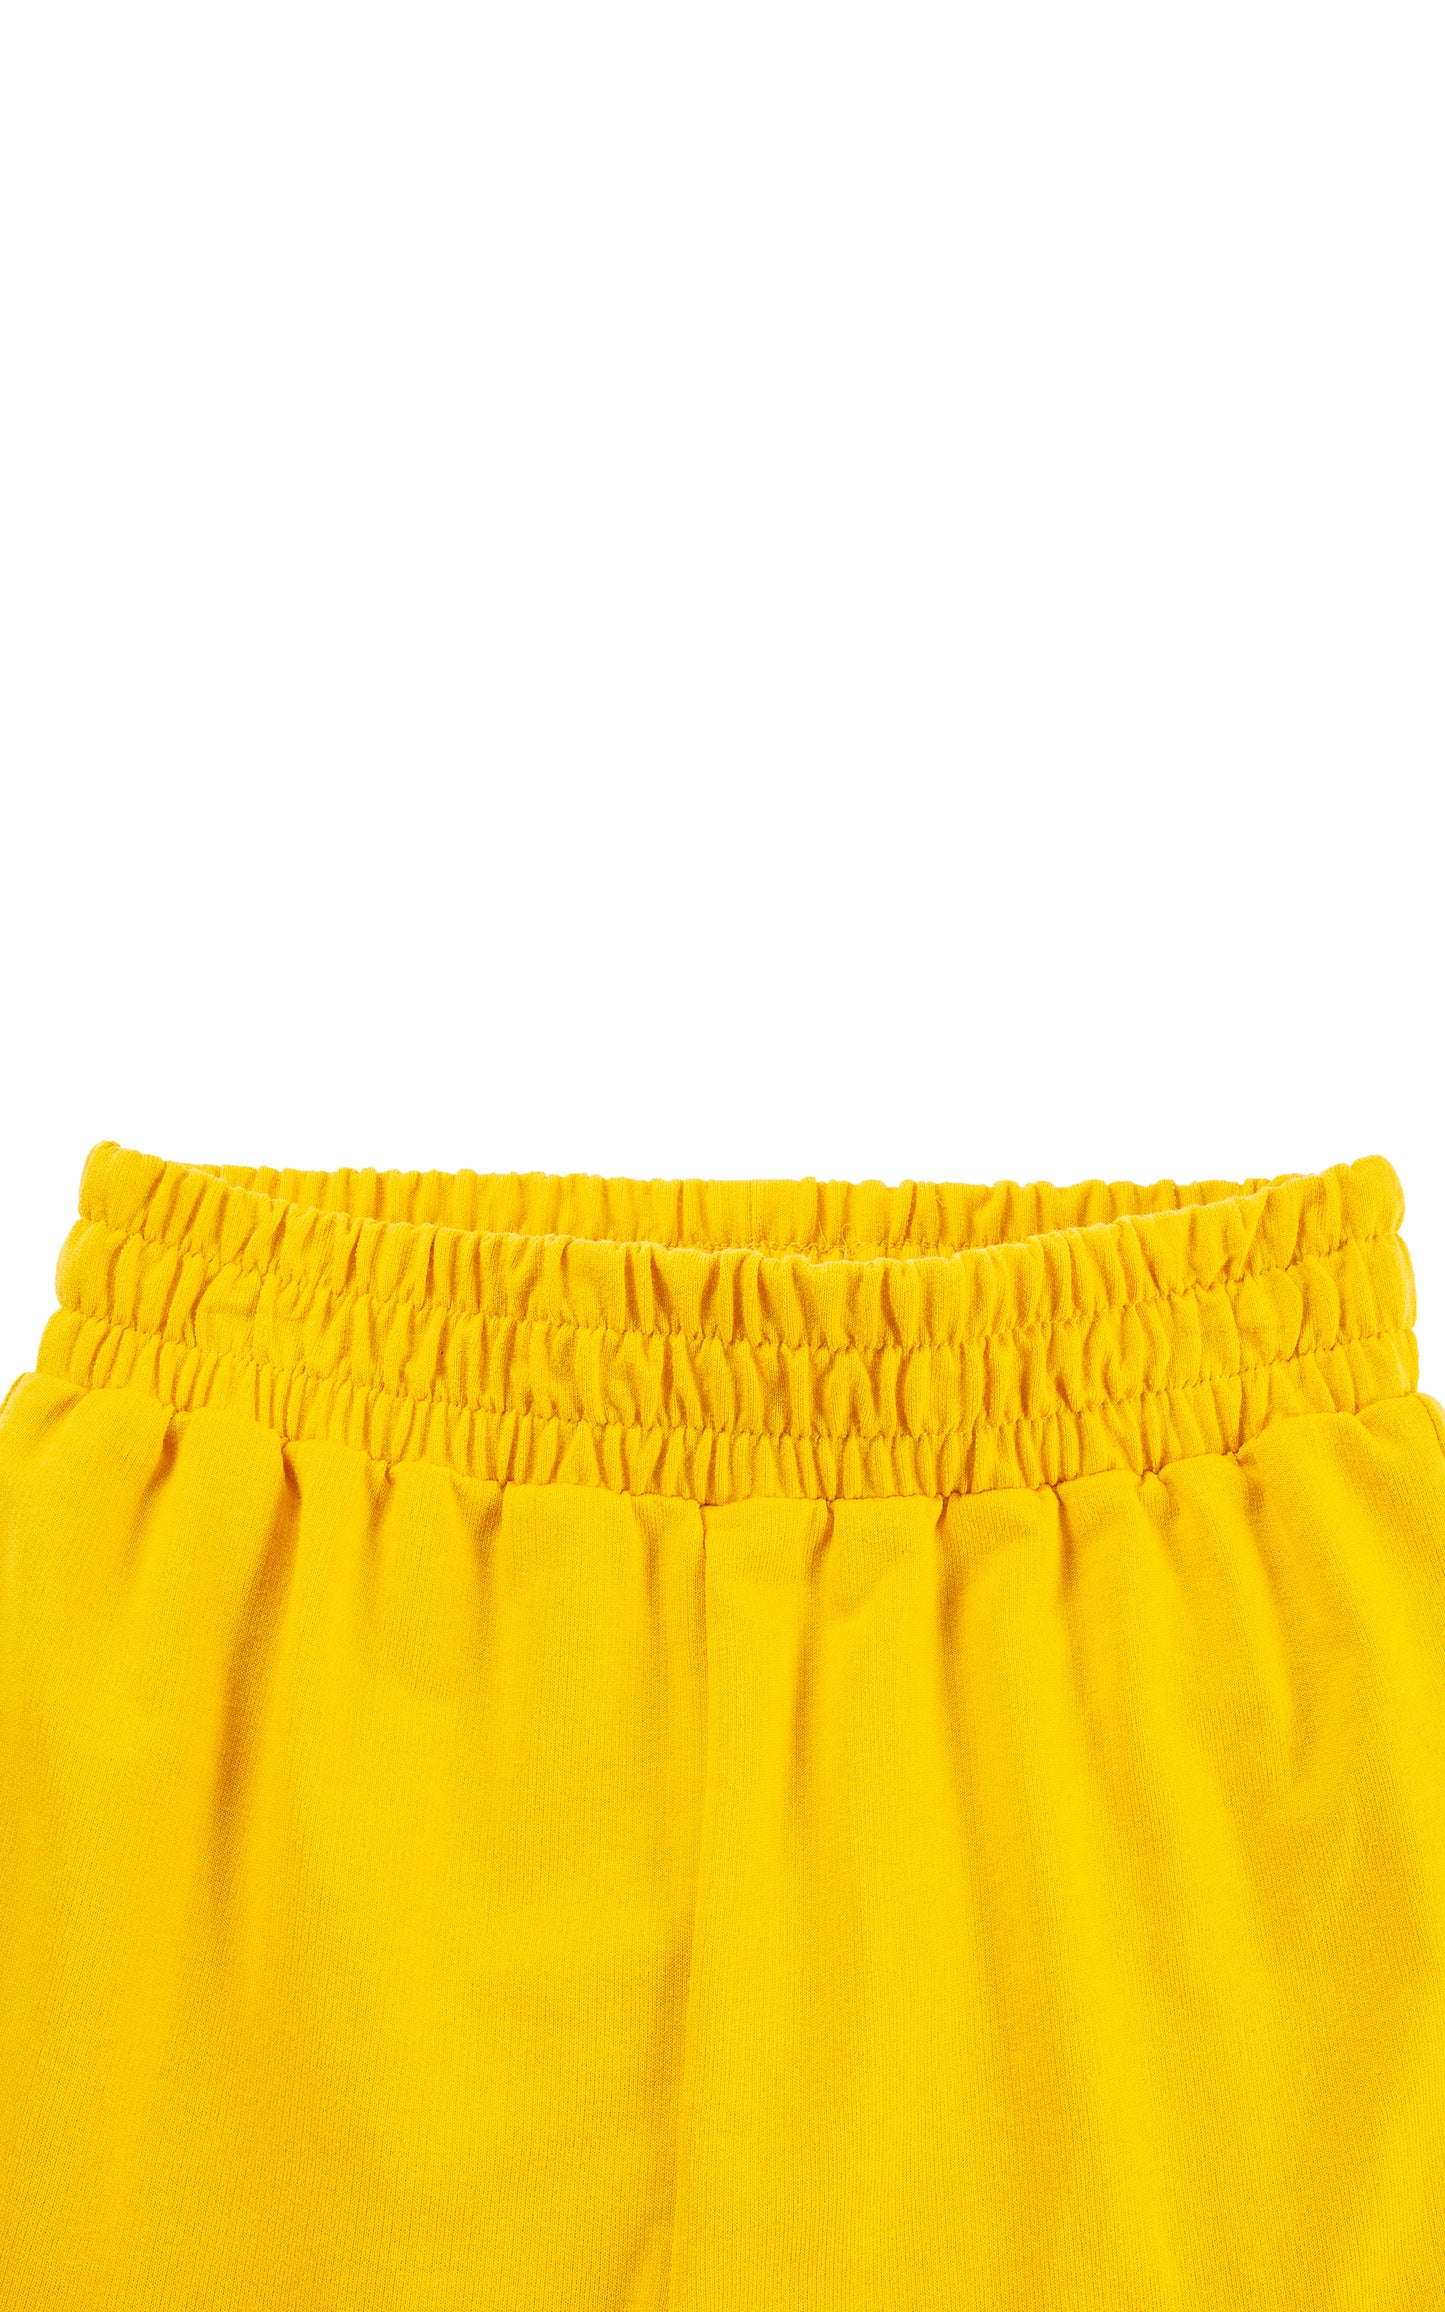 CLOSE UP OF RUCHED WAISTBAND OF  BRIGHT YELLOW SWEATPANTS